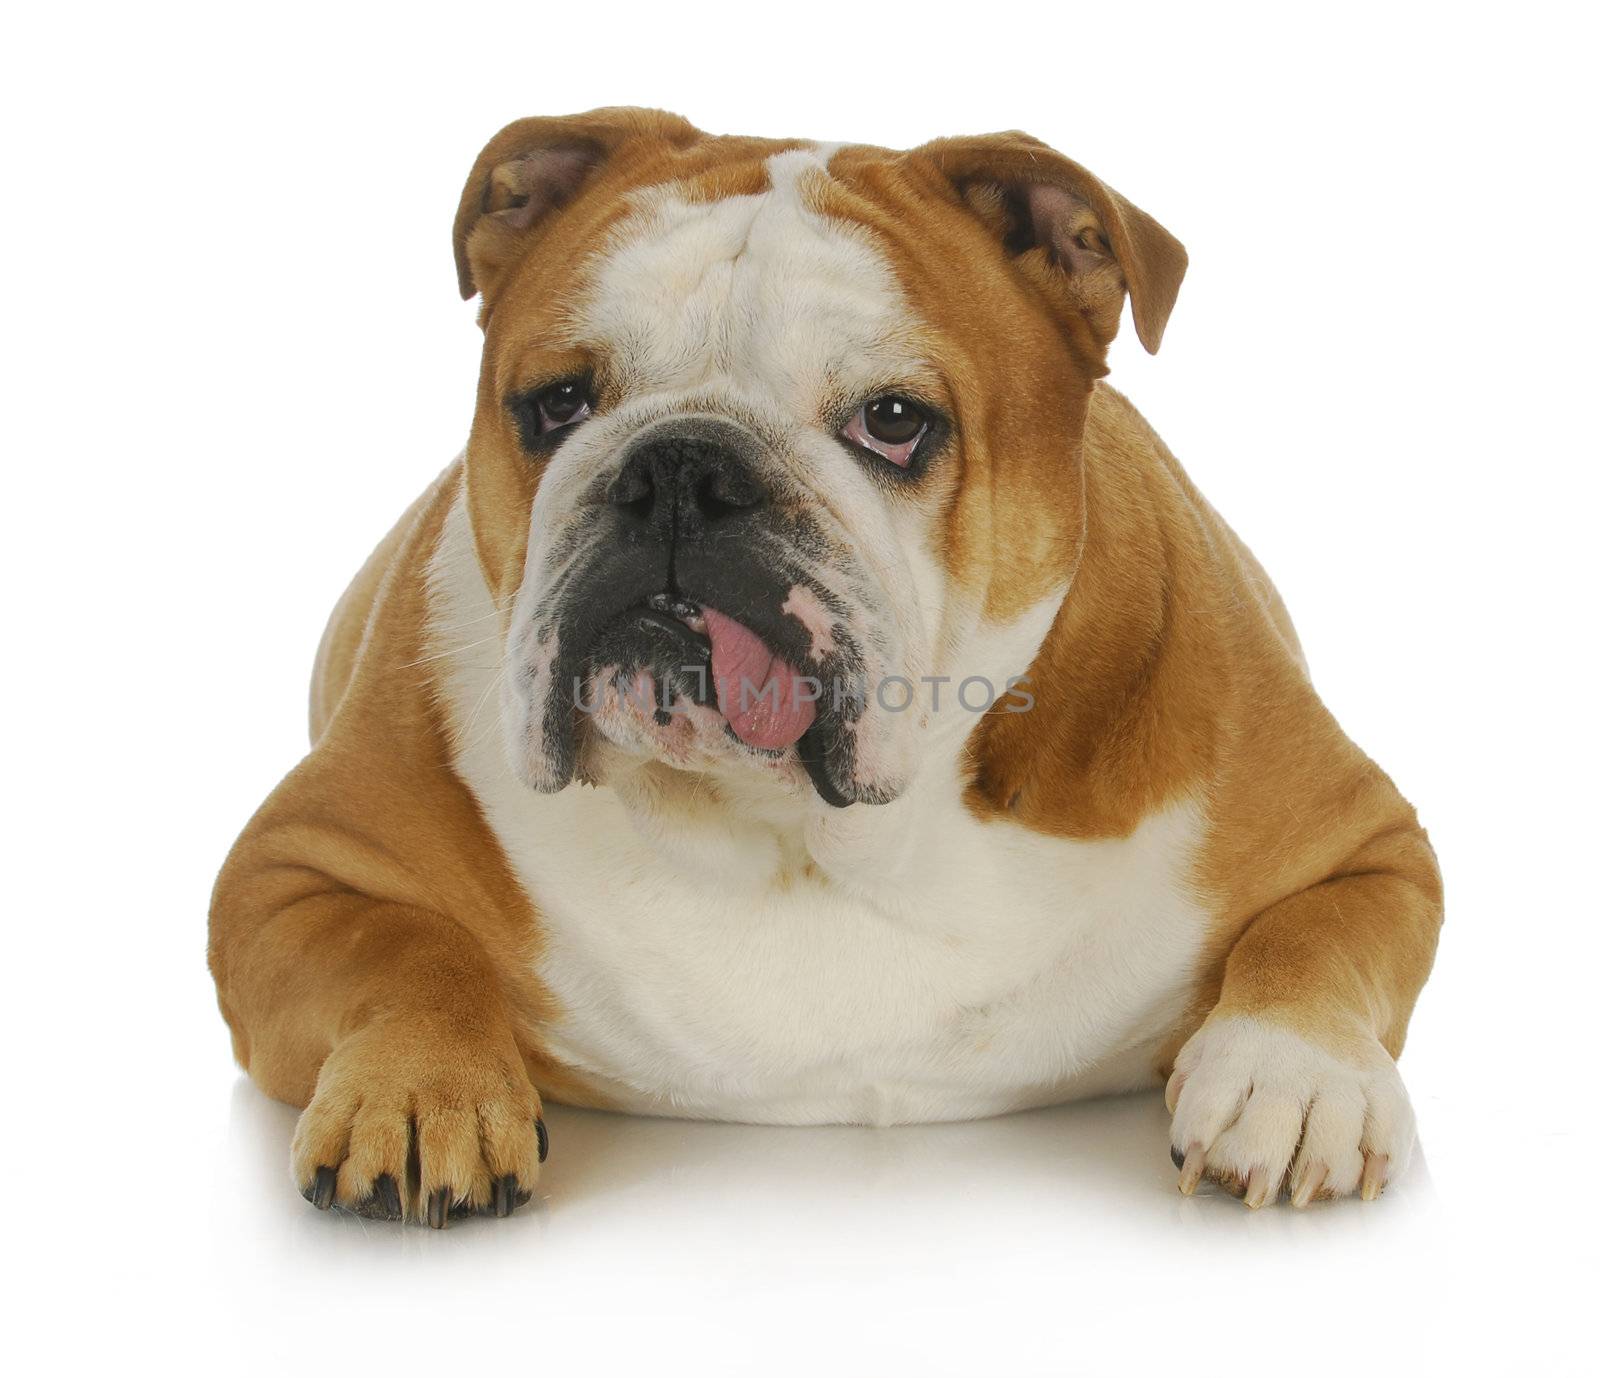 ugly dog - english bulldog with tongue sticking out laying down on white background